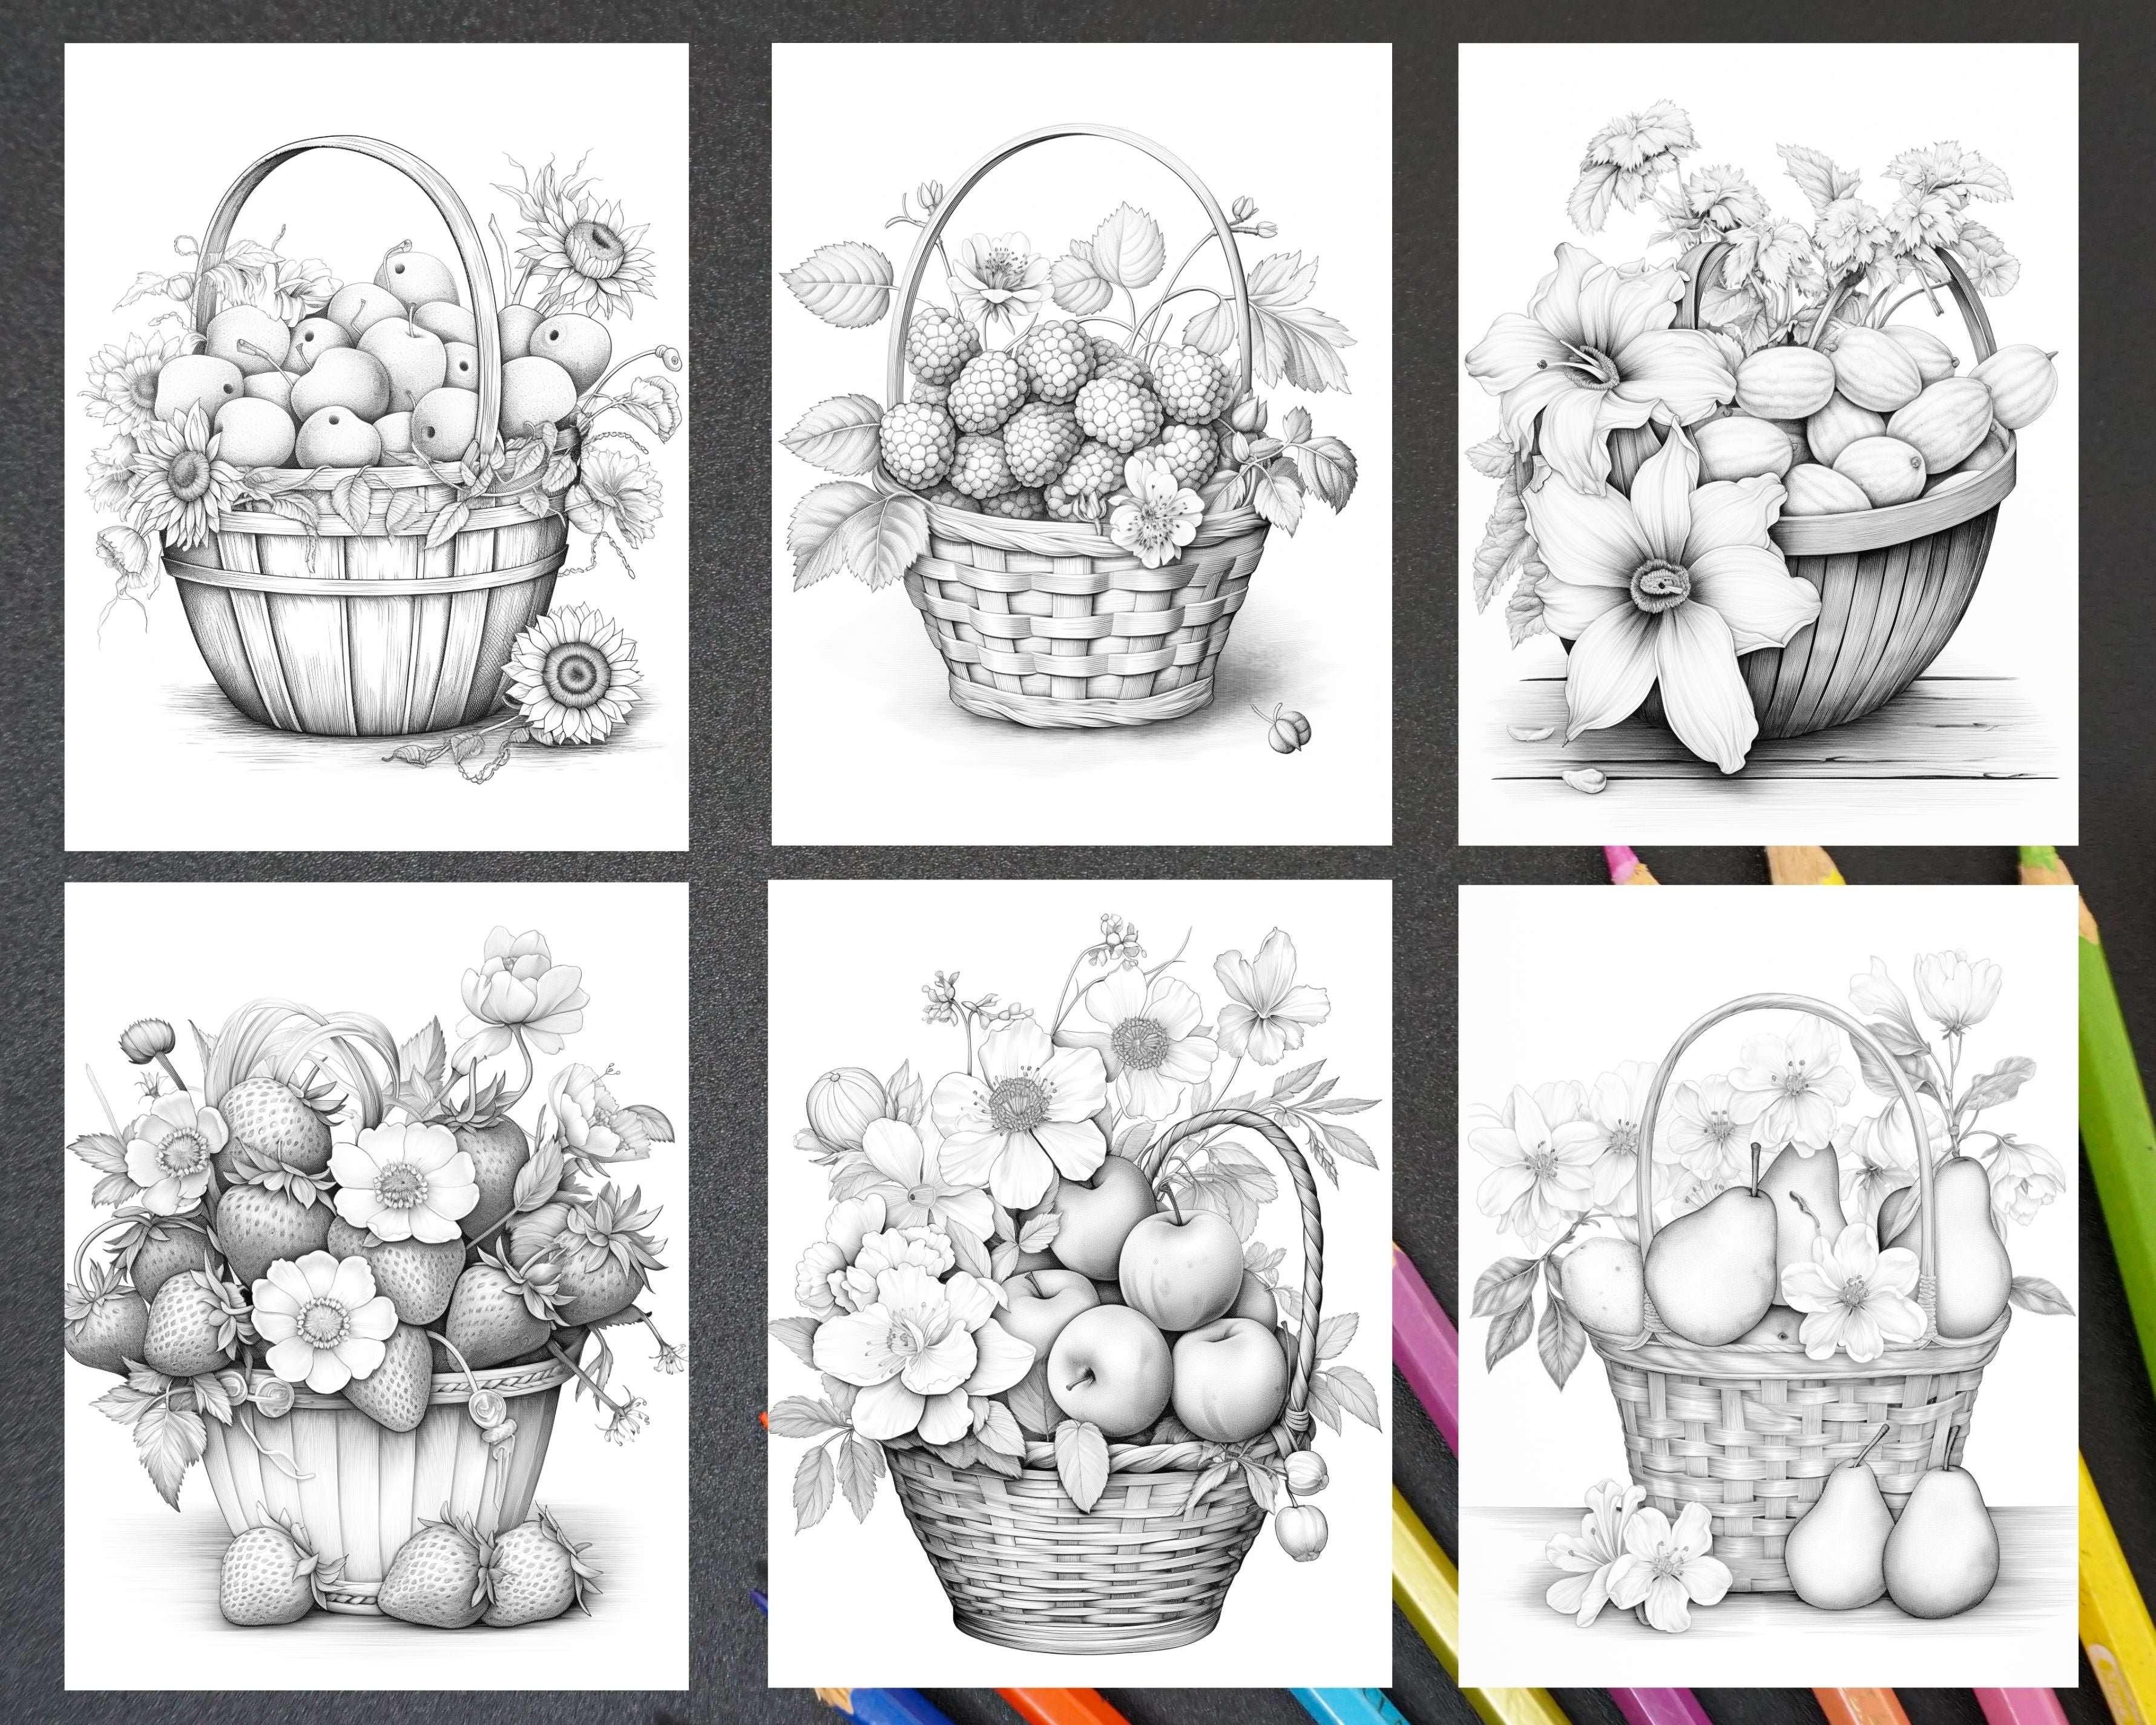 How to draw and colour Fruit Basket easy step by step | Fruit basket drawing |Drawing of fruit basket - YouTube